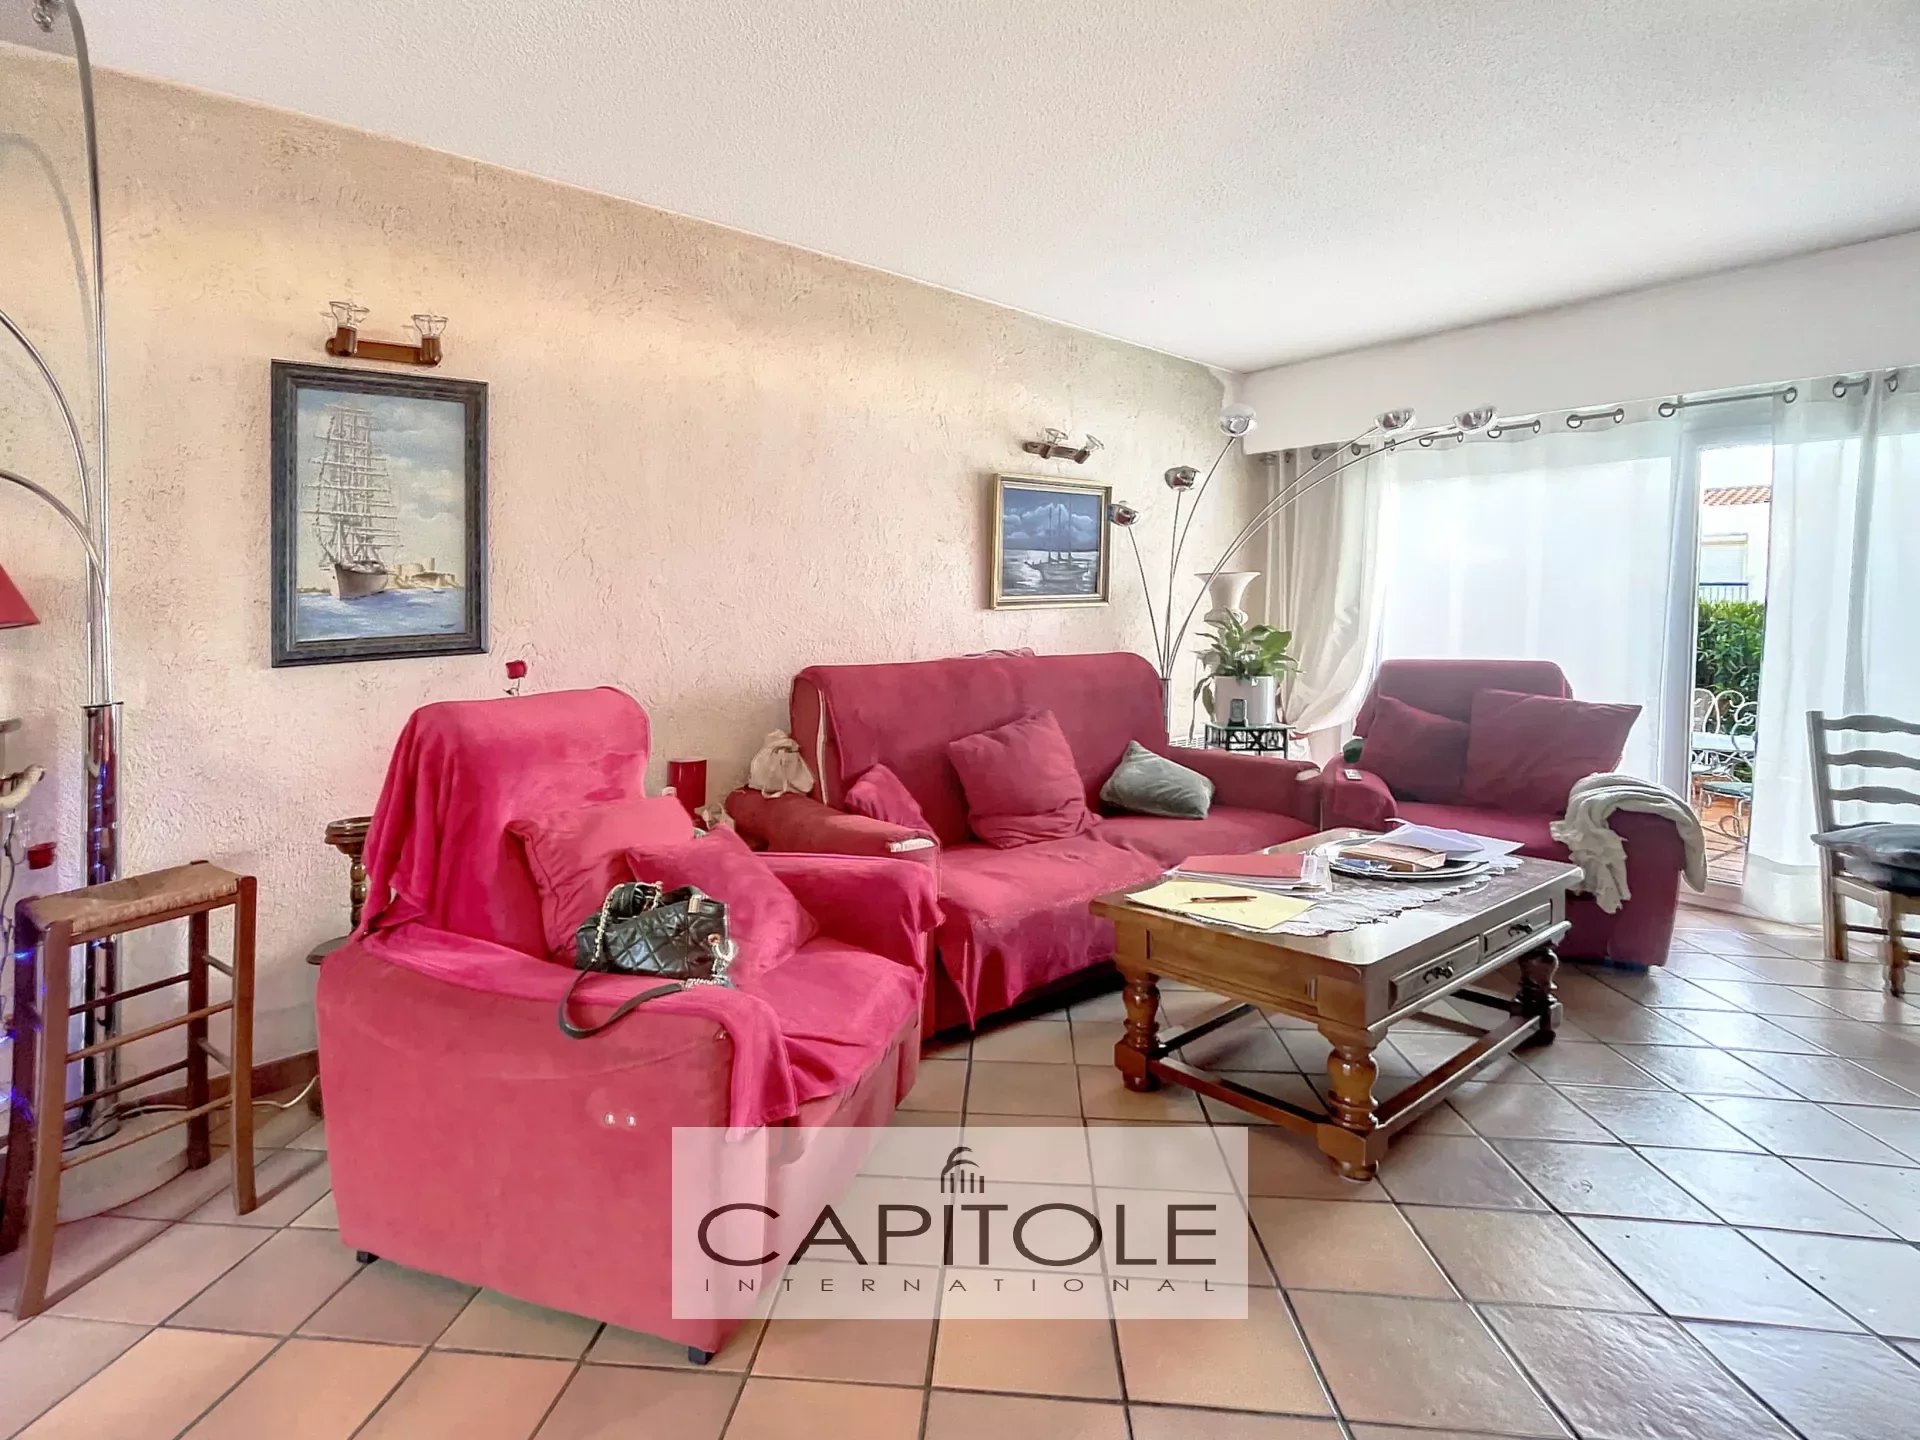 Antibes  for sale  villa of 105sqm with garden. 4 bedrooms.